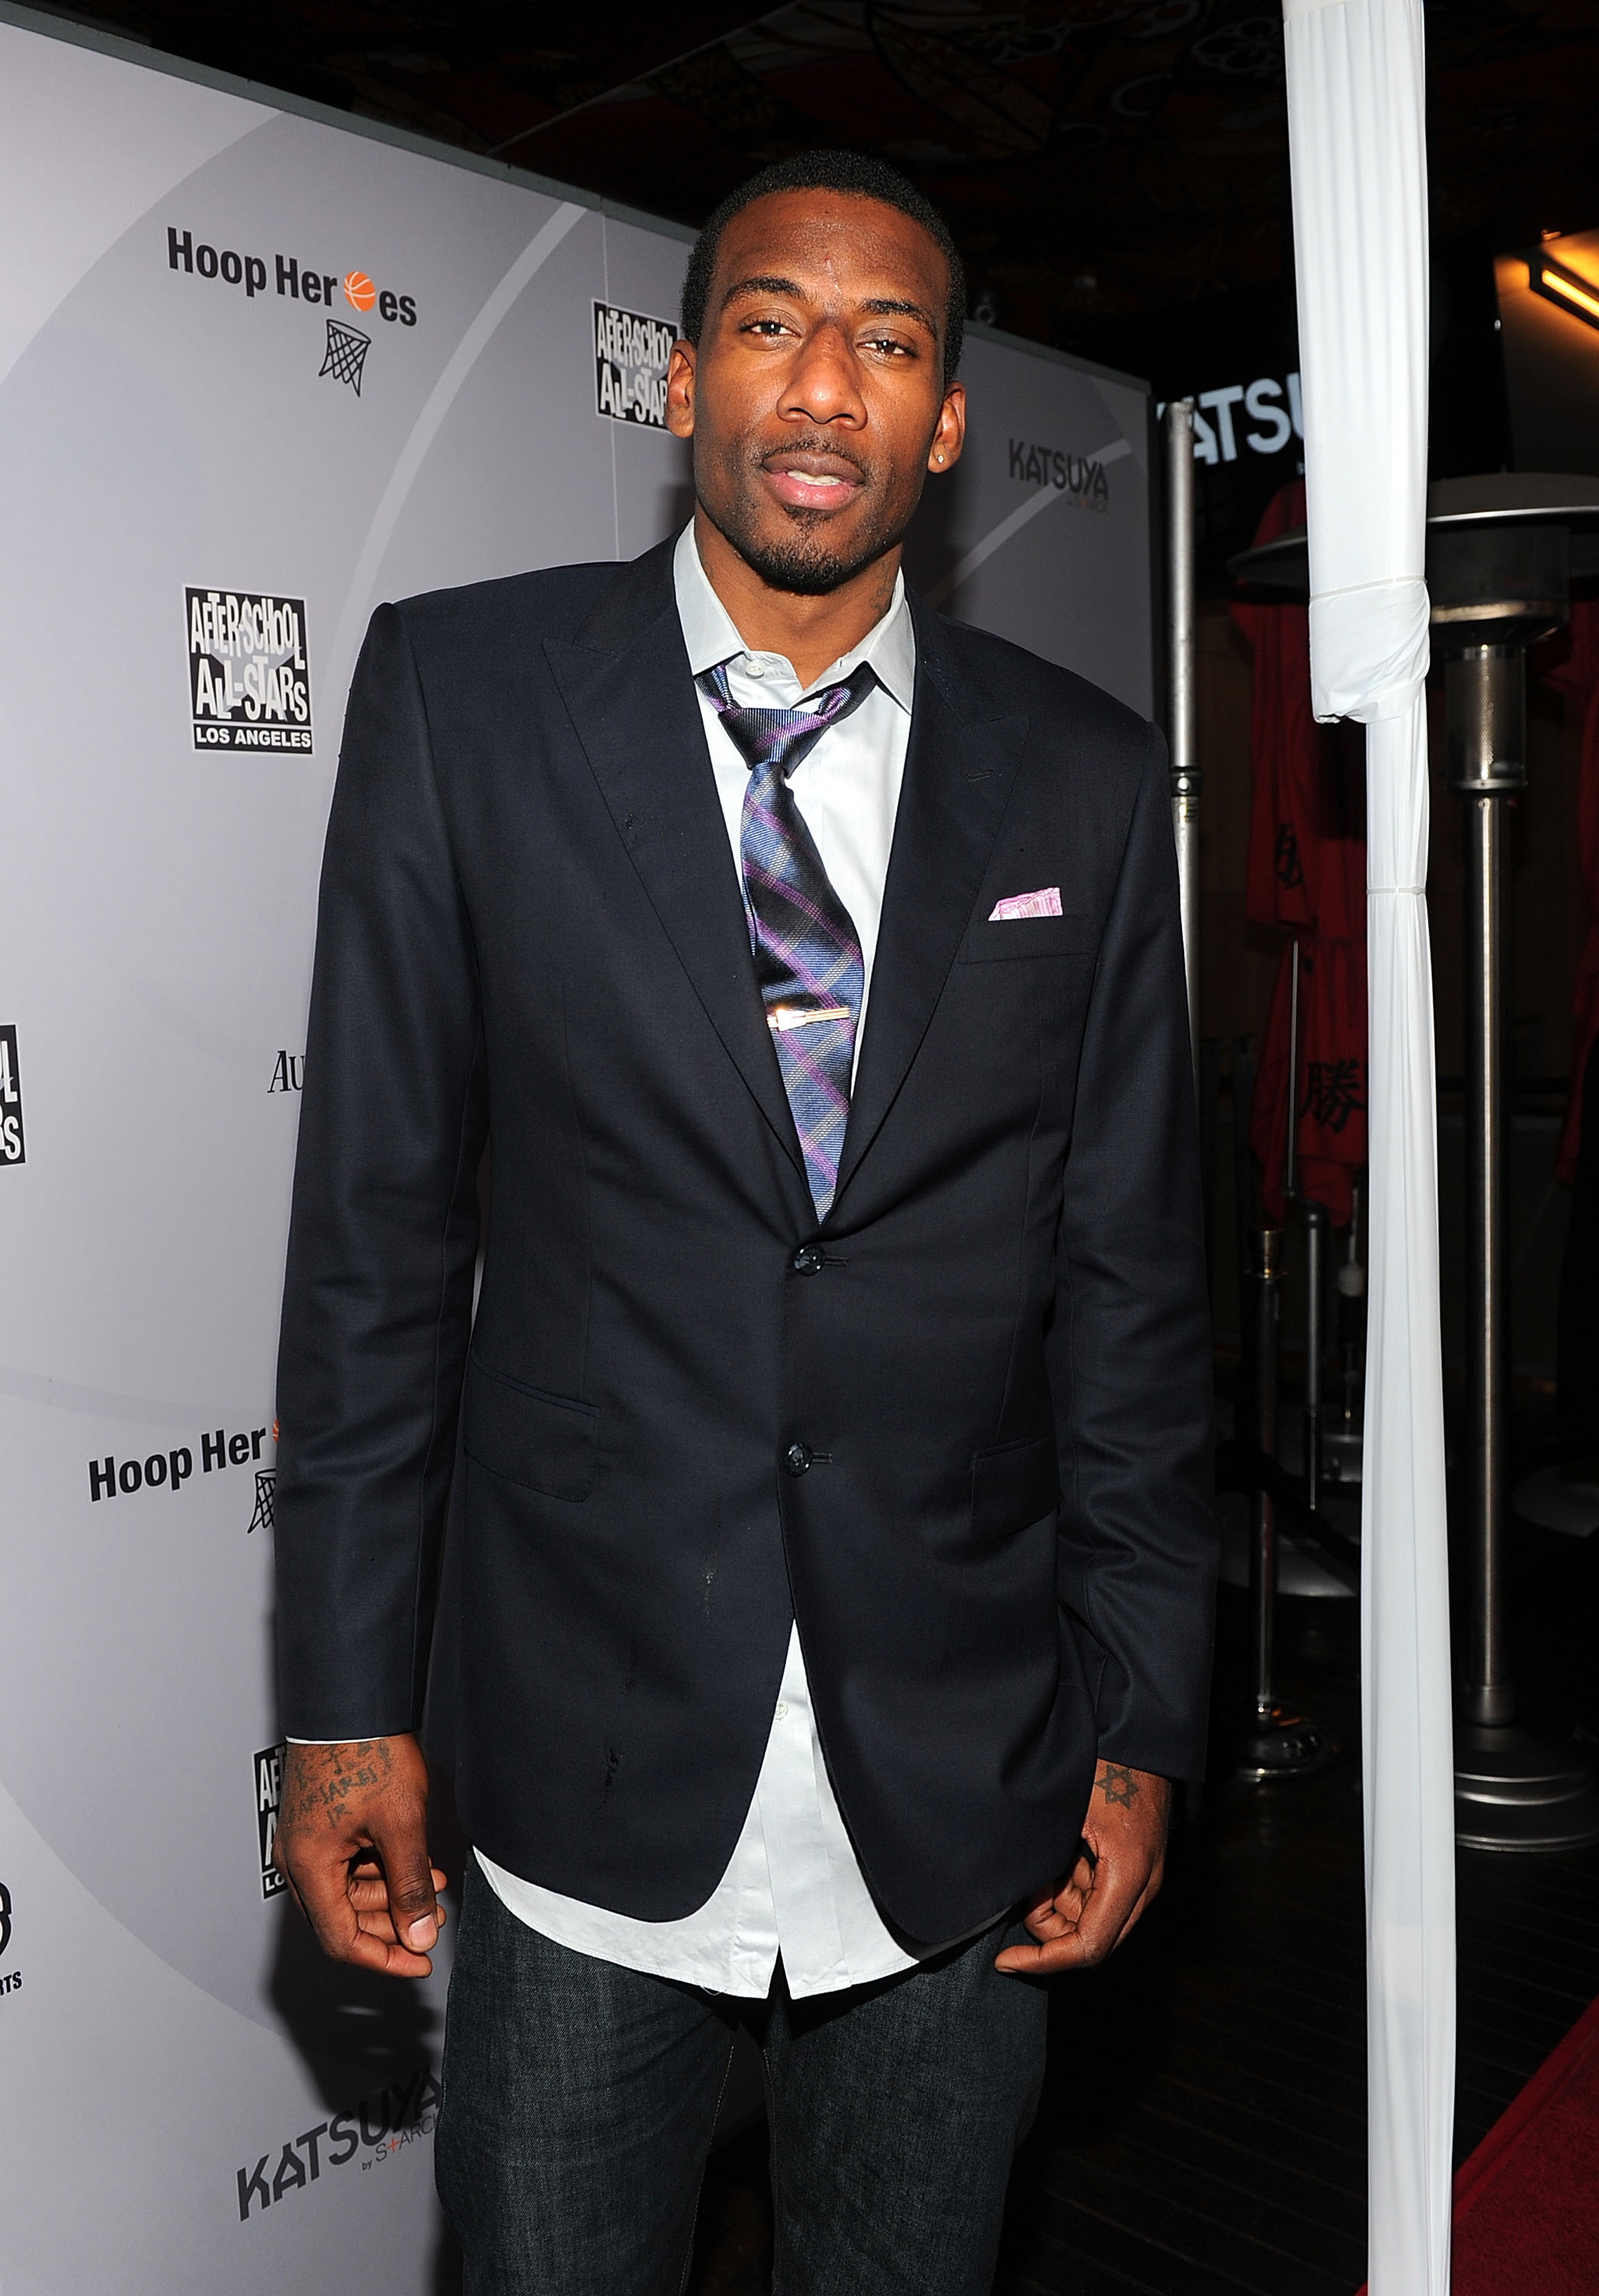 Not a bad suit Amare, but I think Knicks fans want to see the uniform against Boston in the first round.